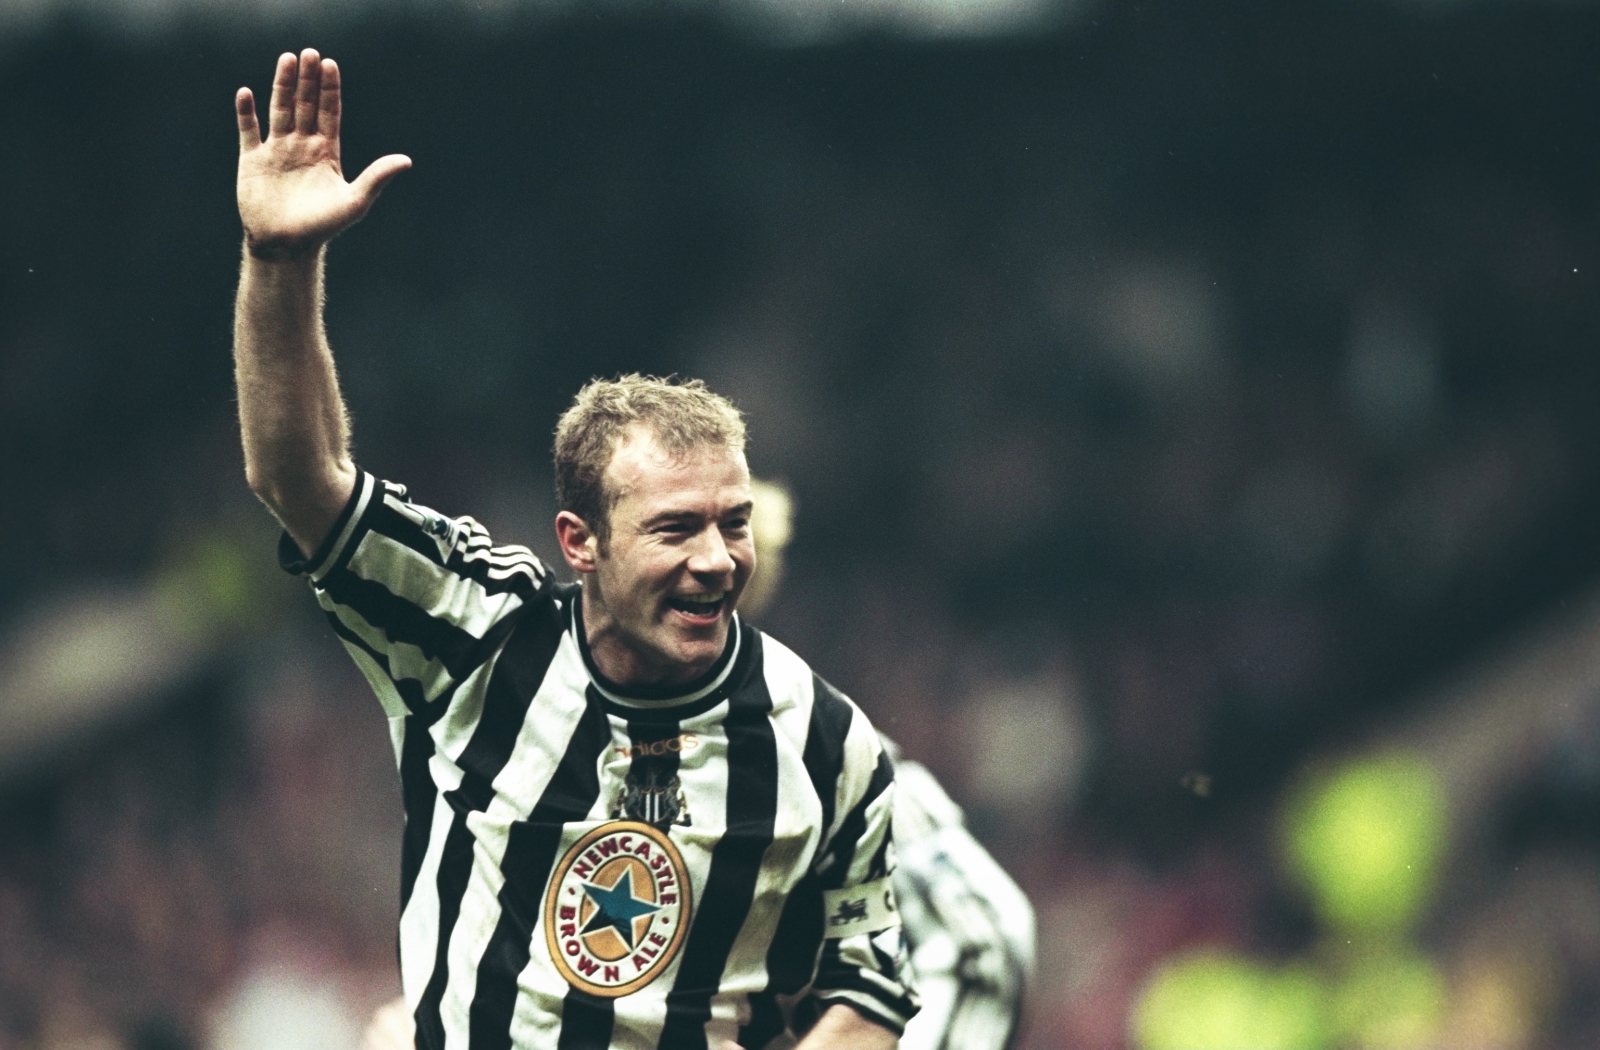 Happy birthday to Alan Shearer, seen here asking to go to the loo. 